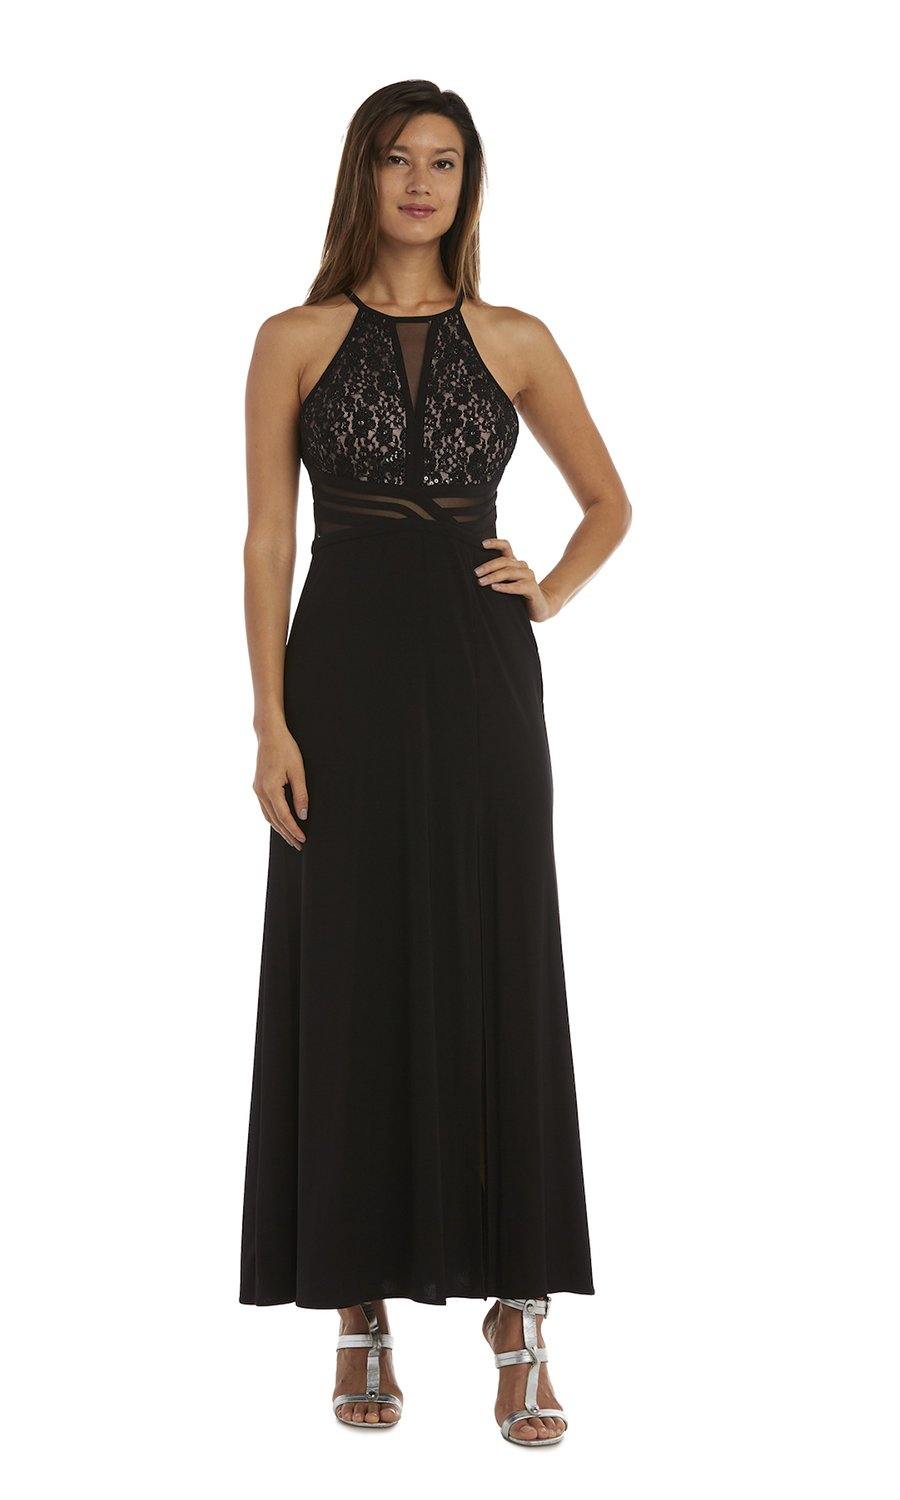 Morgan & Co Formal Inset Bodice Long Formal Dress 12524 - The Dress Outlet